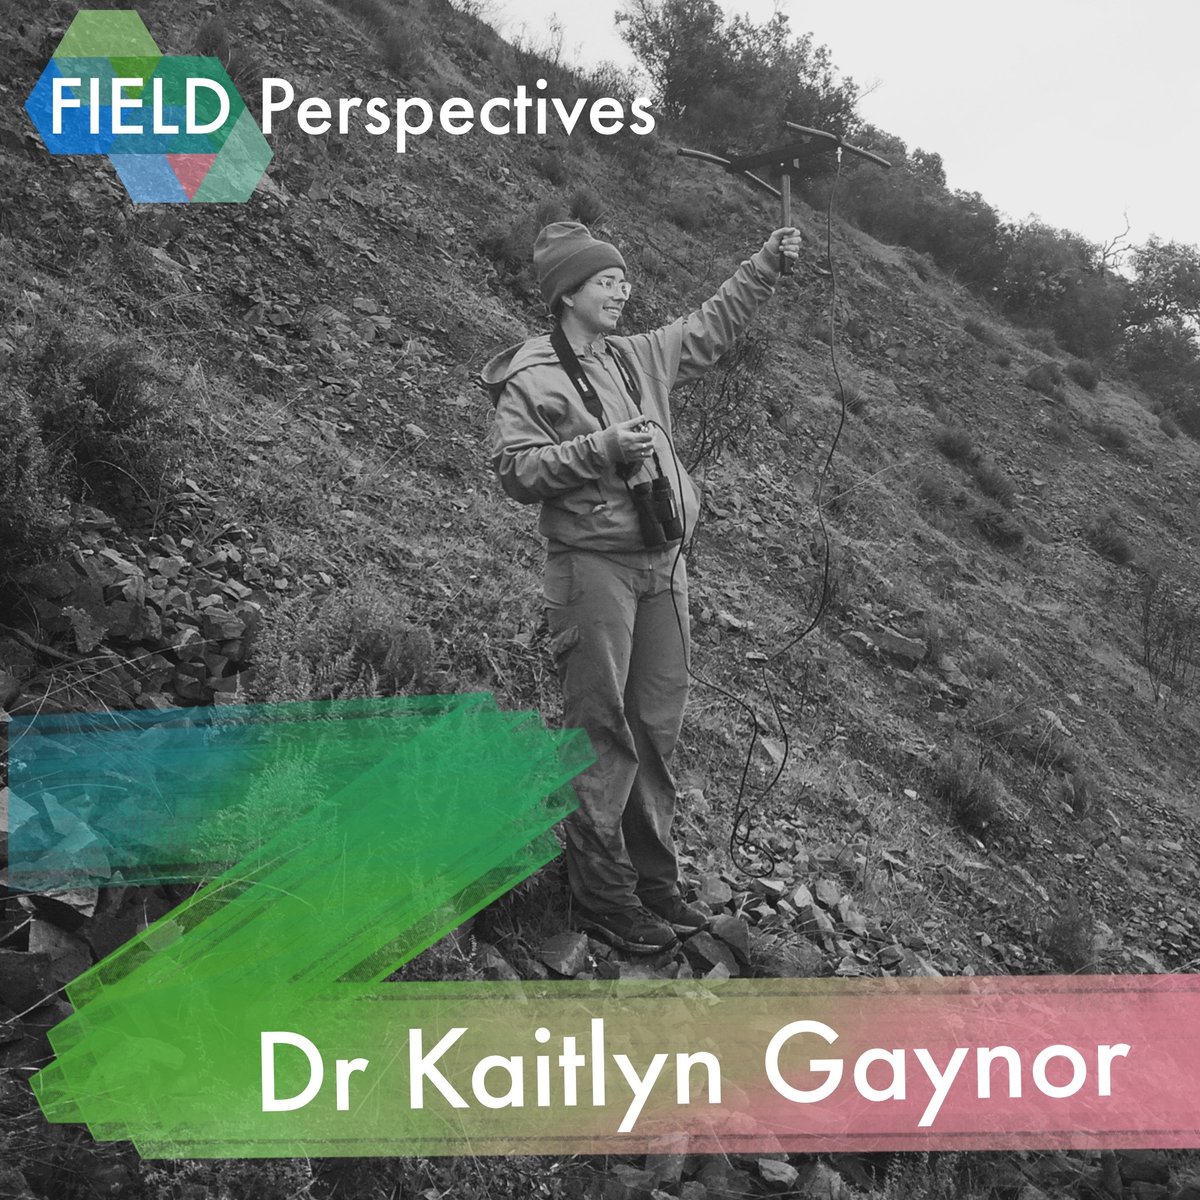 .@kaitlyngaynor discusses recontextualising identity with fieldwork at fieldperspectives.org/KaitlynGaynor.… 'Navigating relationships and community-building while conducting fieldwork has forced me to reckon with complex issues of privilege, positionality, and power as a queer white woman.'